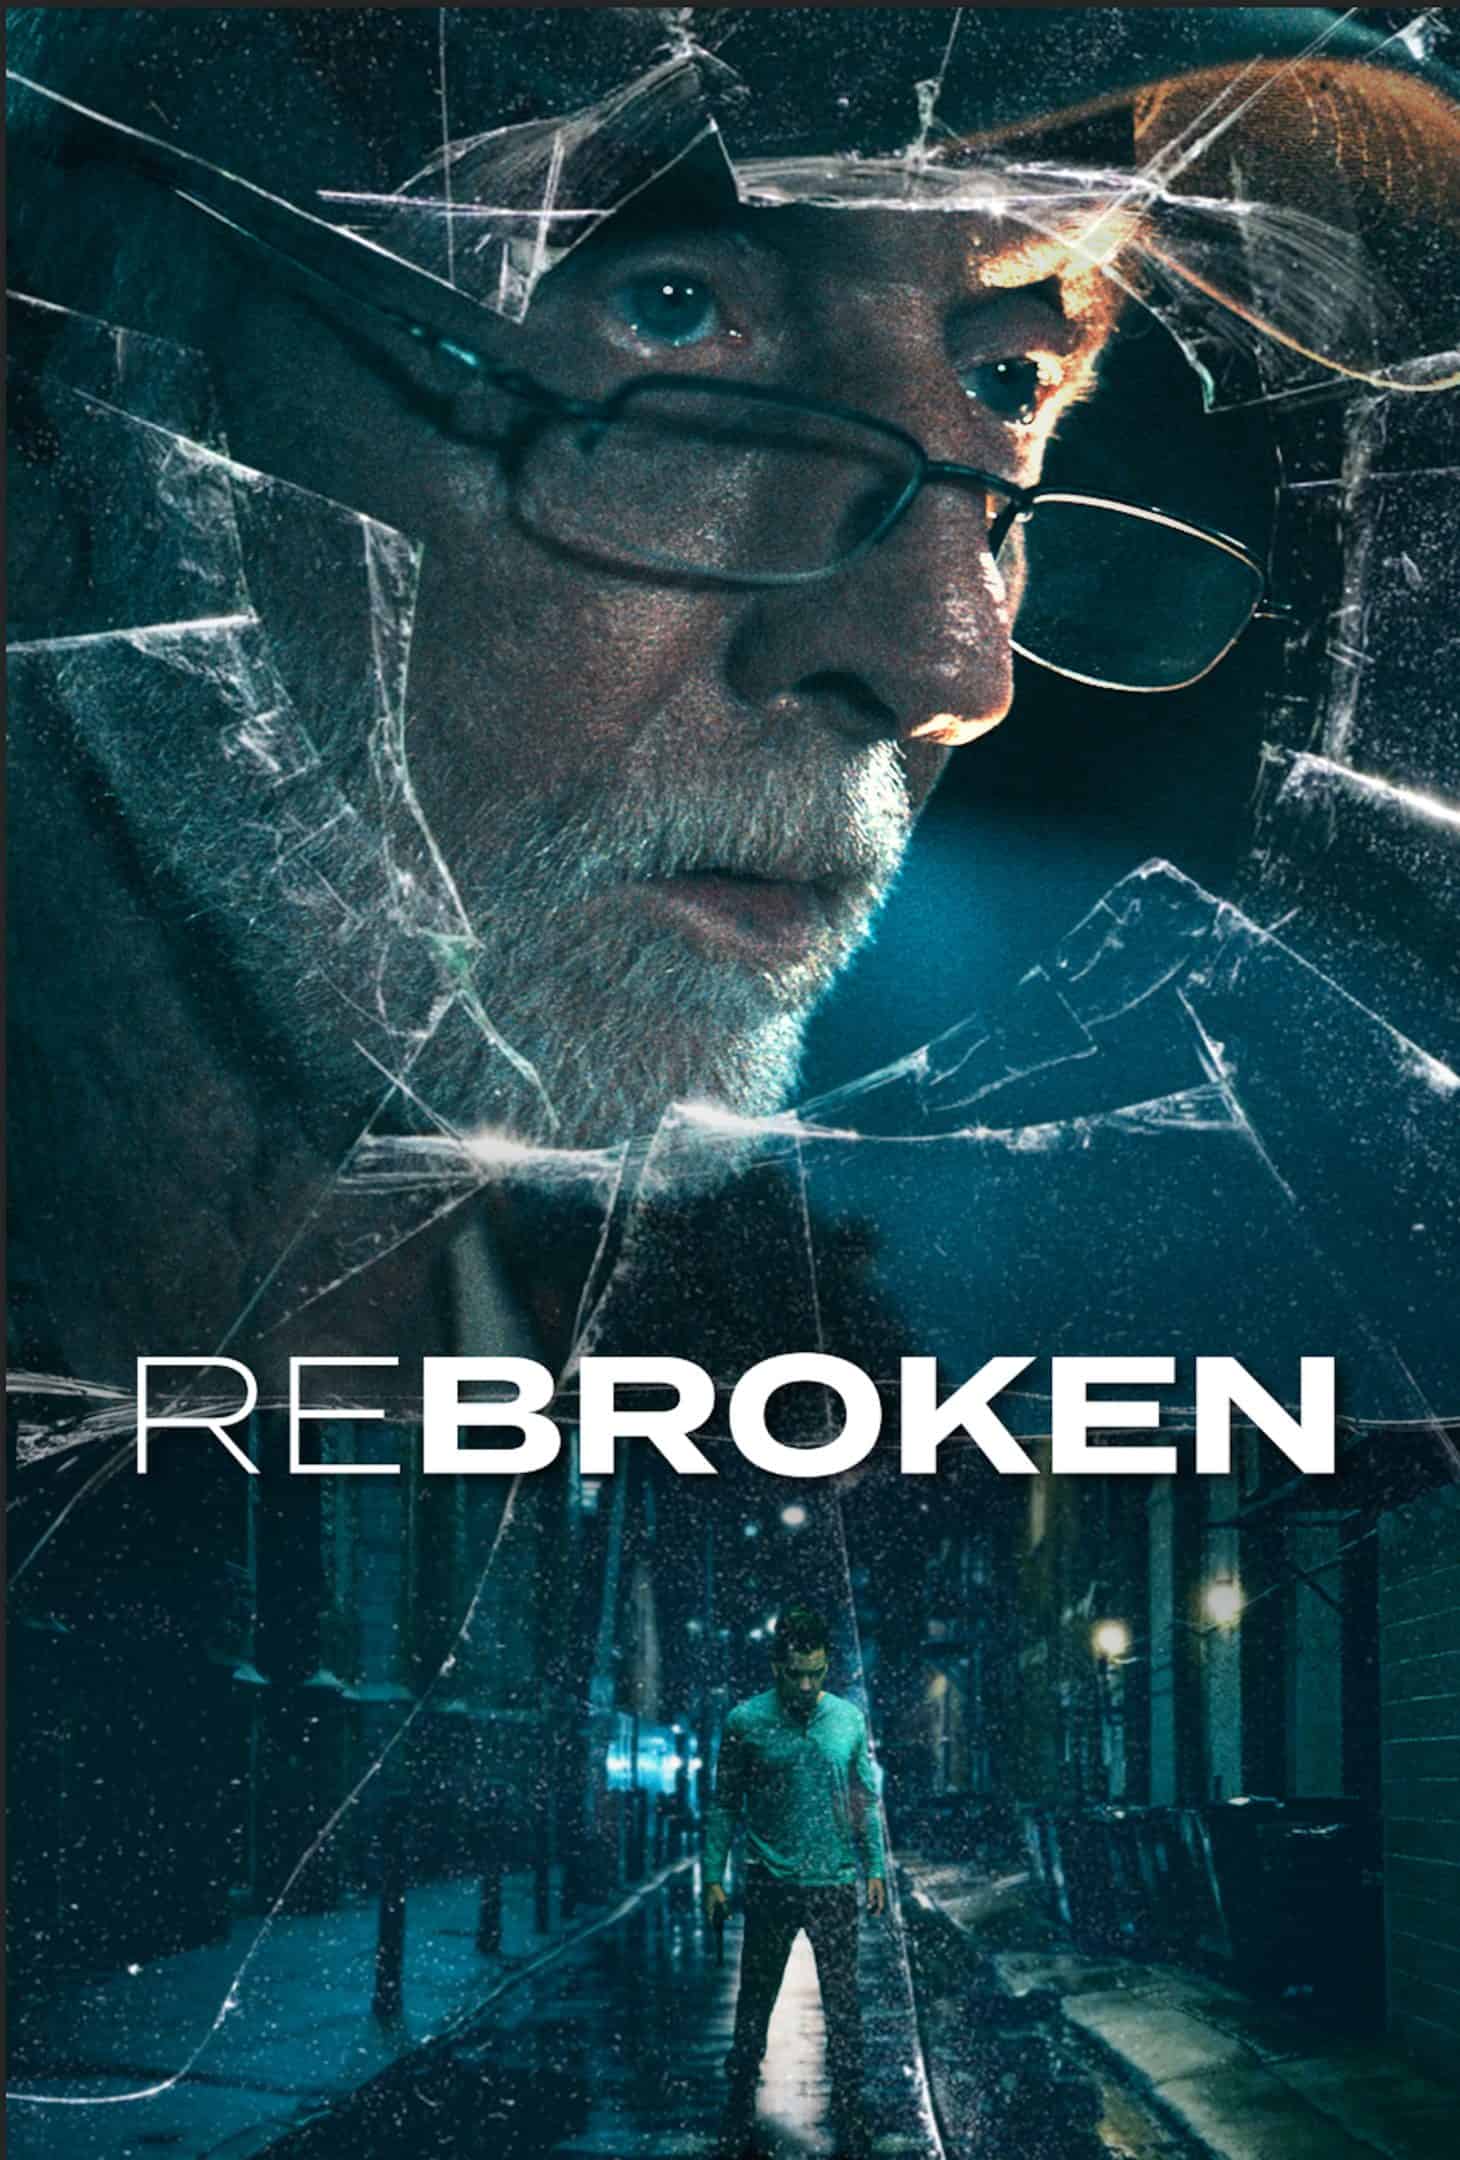 Rebroken gets a new trailer and poster featuring Tobin Bell 1